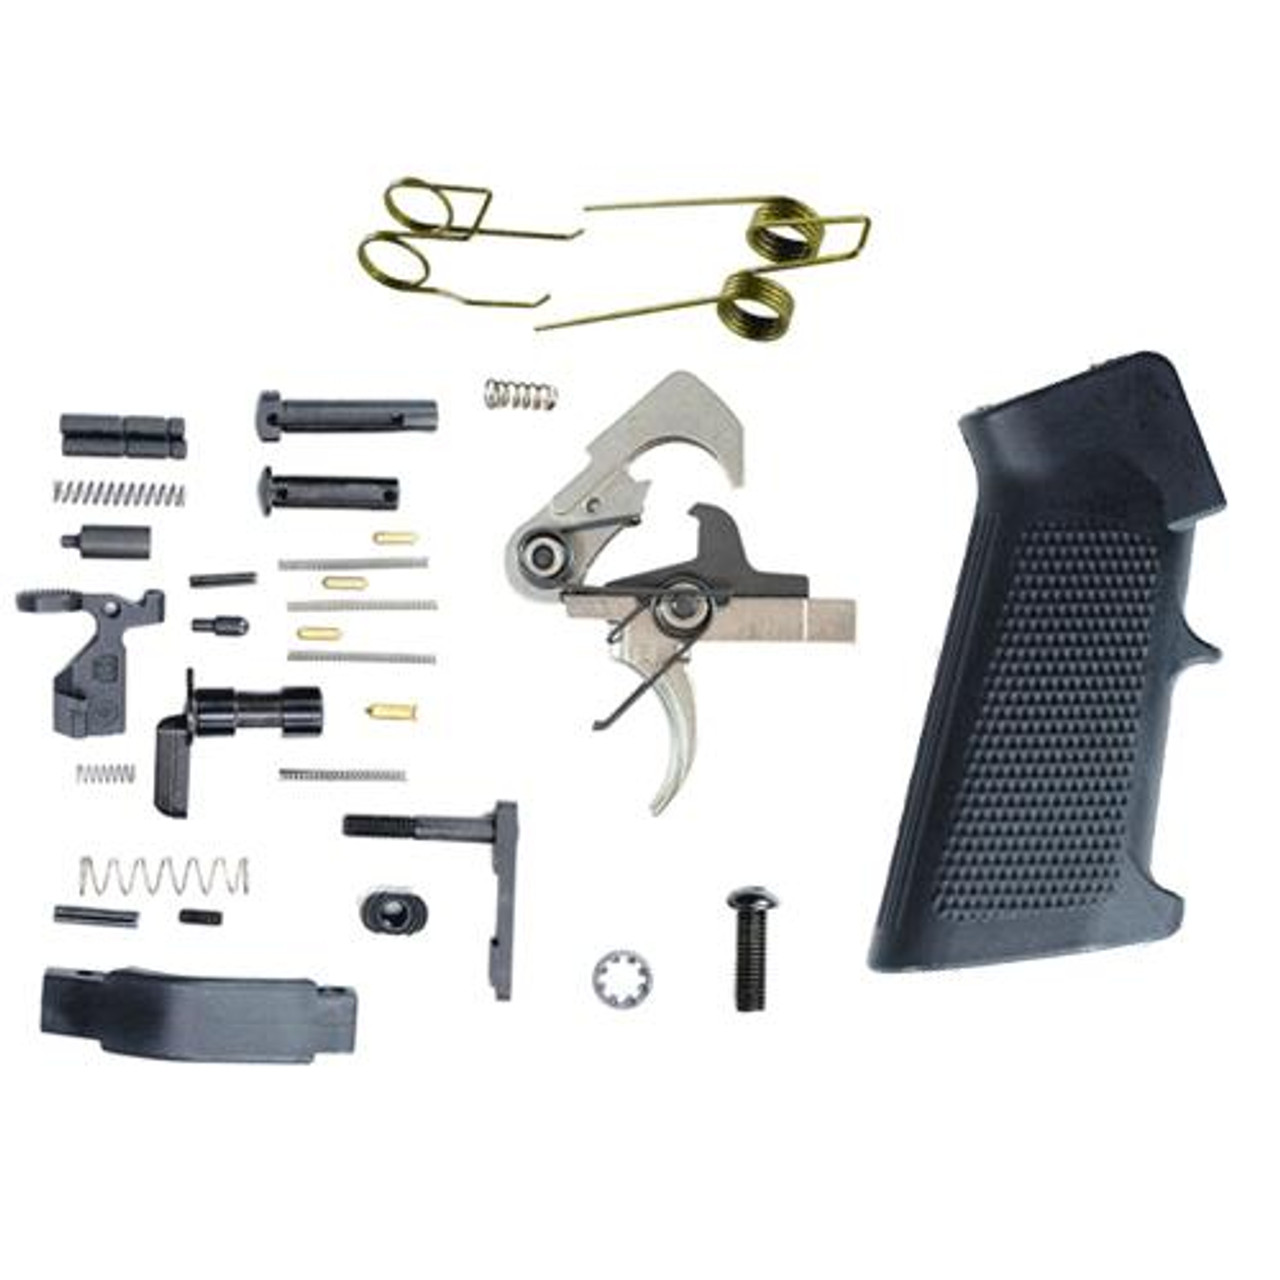 AR 15 Lower Parts Kit: With Enhanced Trigger